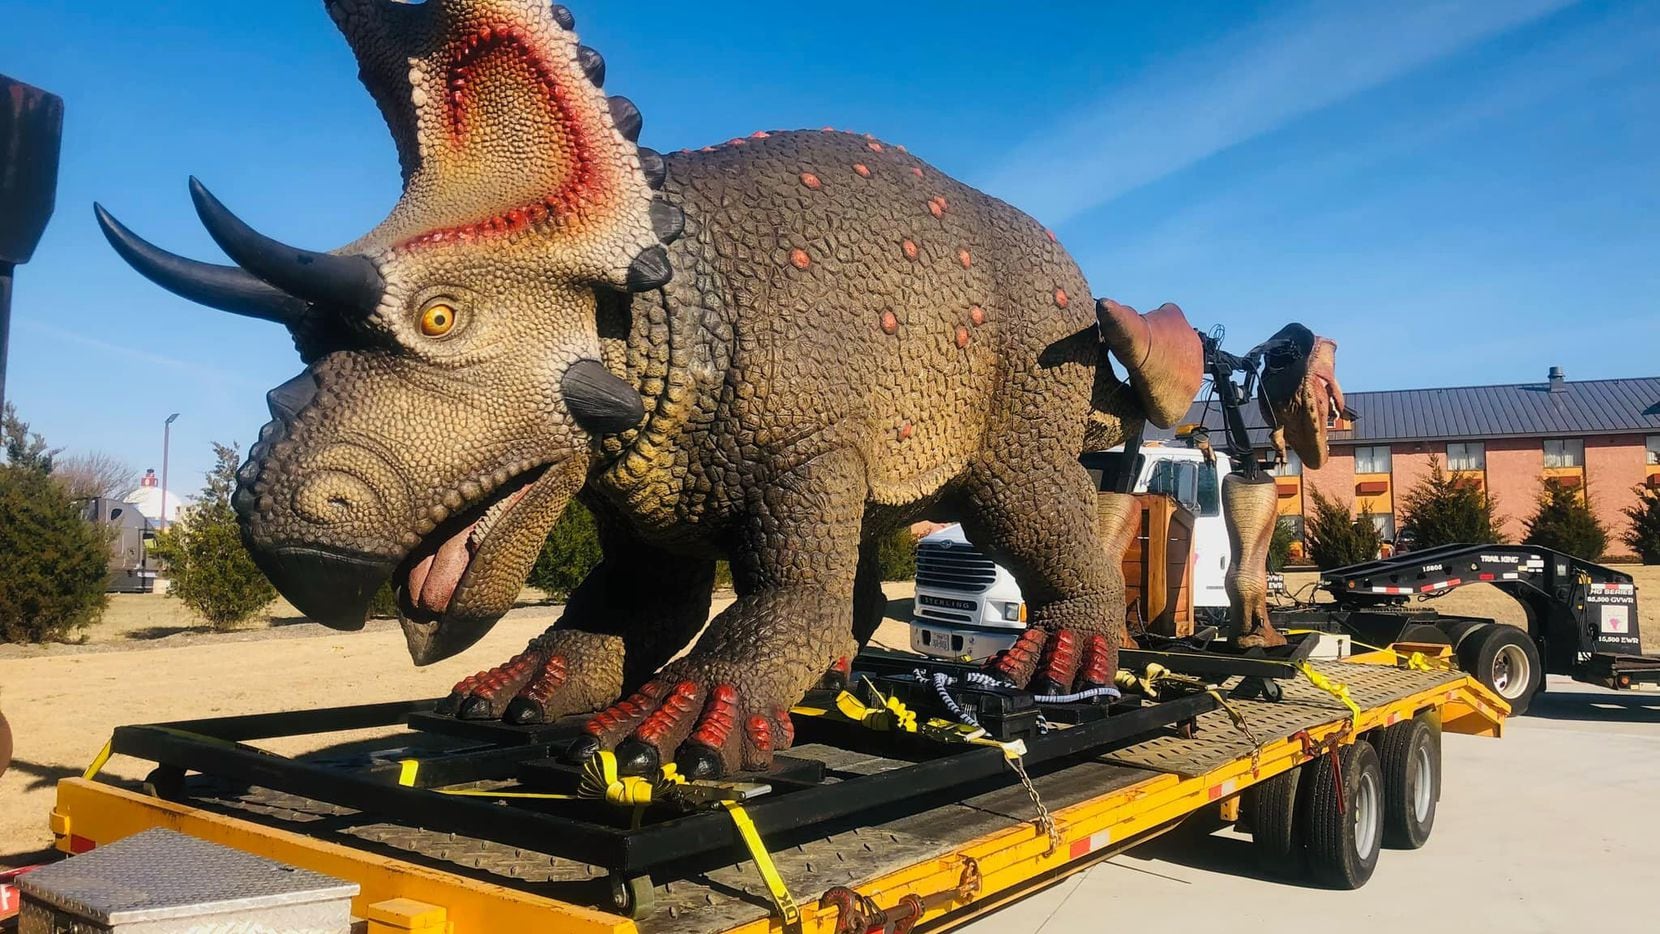 Dinosaurs return to Grapevine in exhibit starting this weekend.